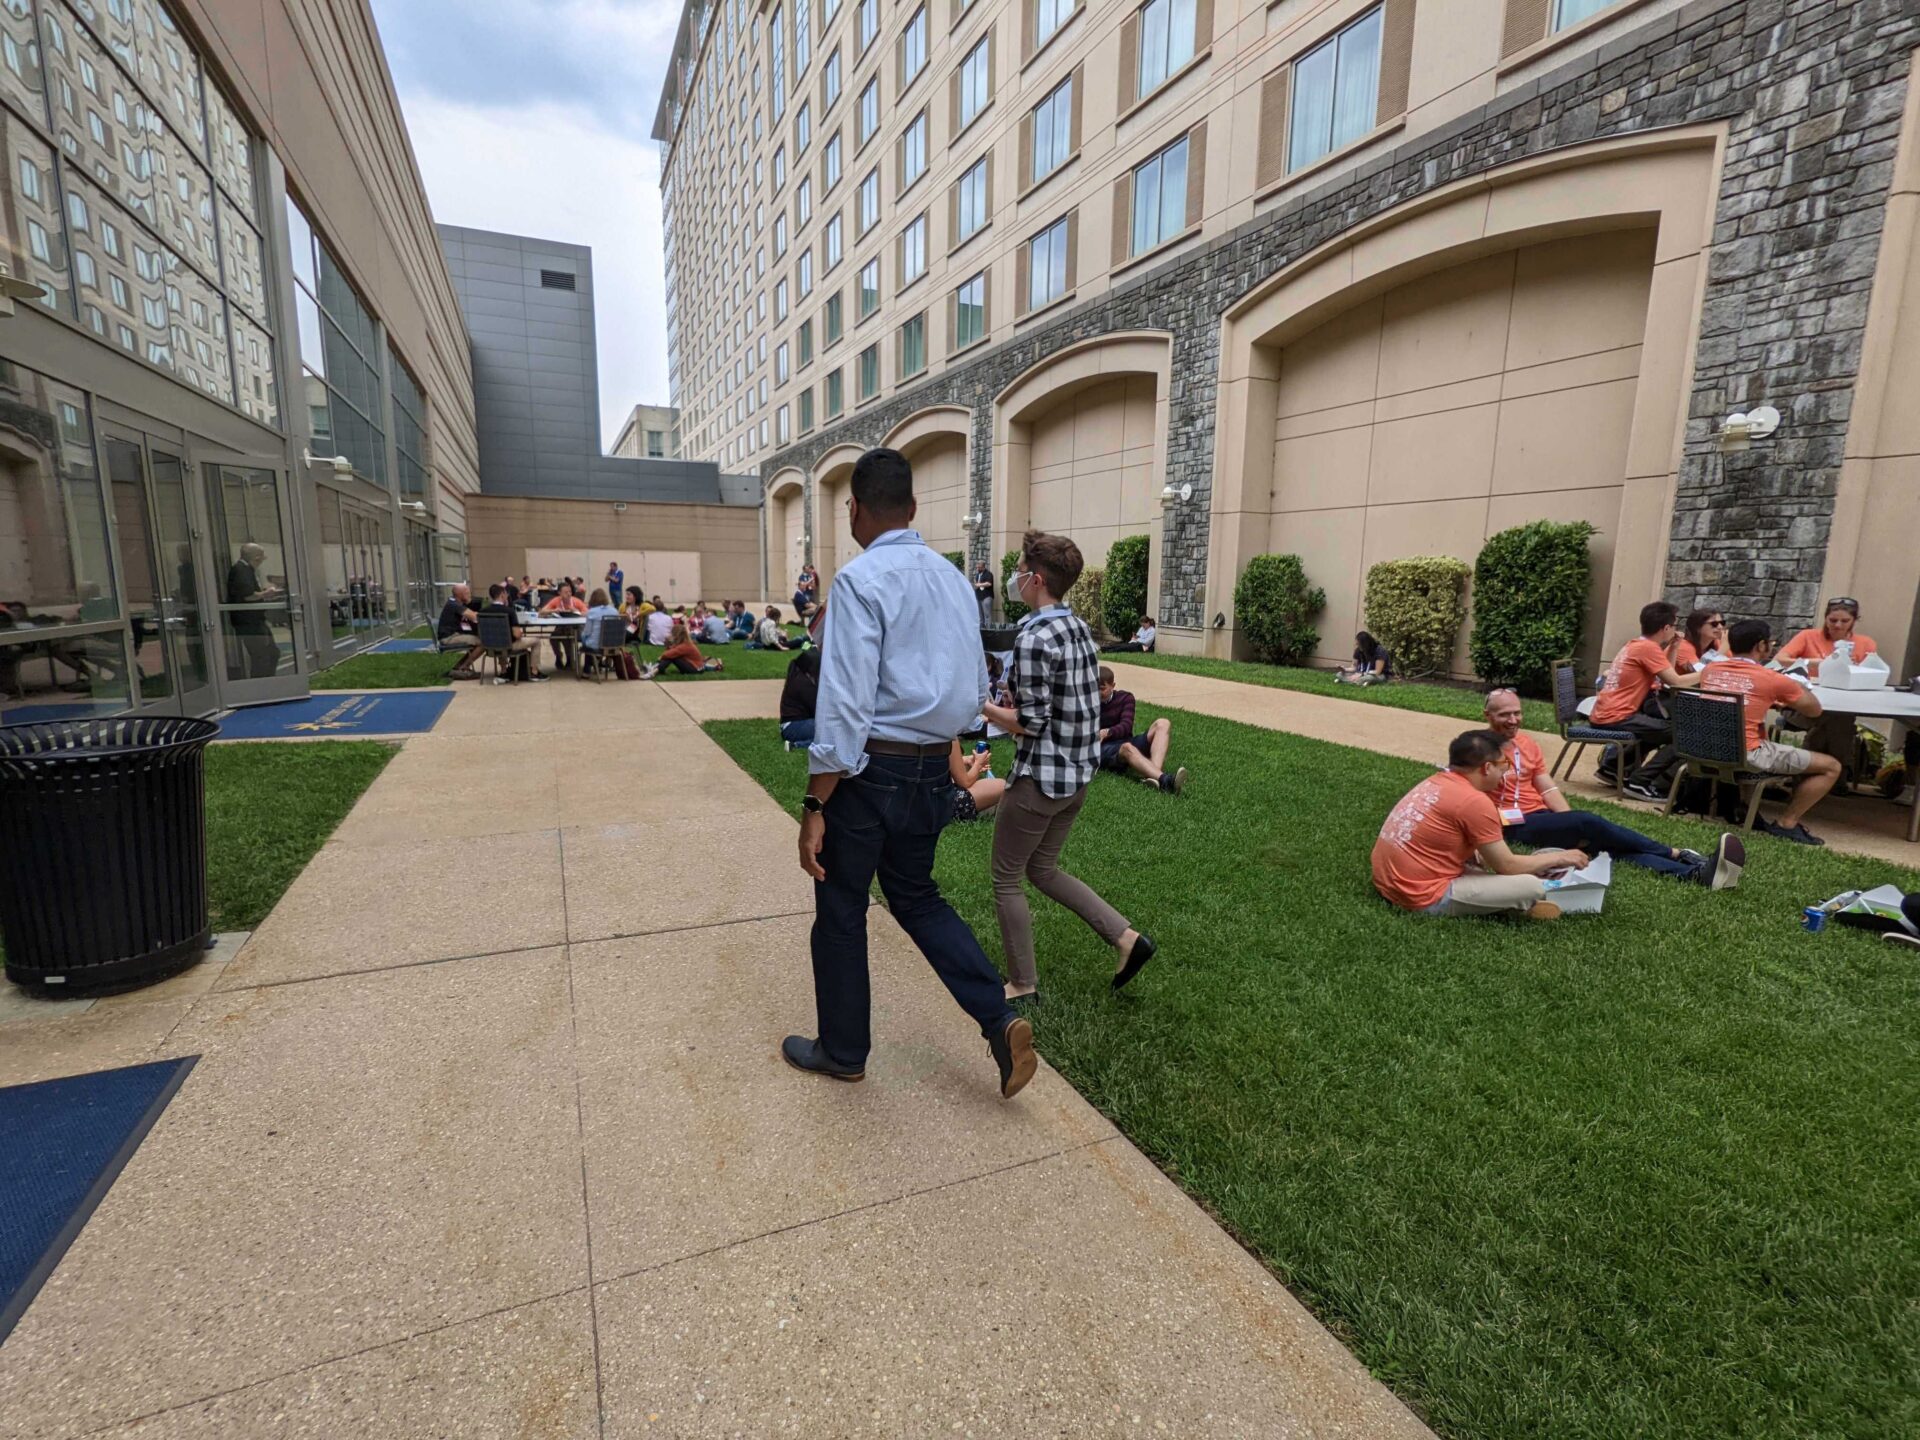 2 people walking while others sit at a table and on the grass outside in between 2 buildings